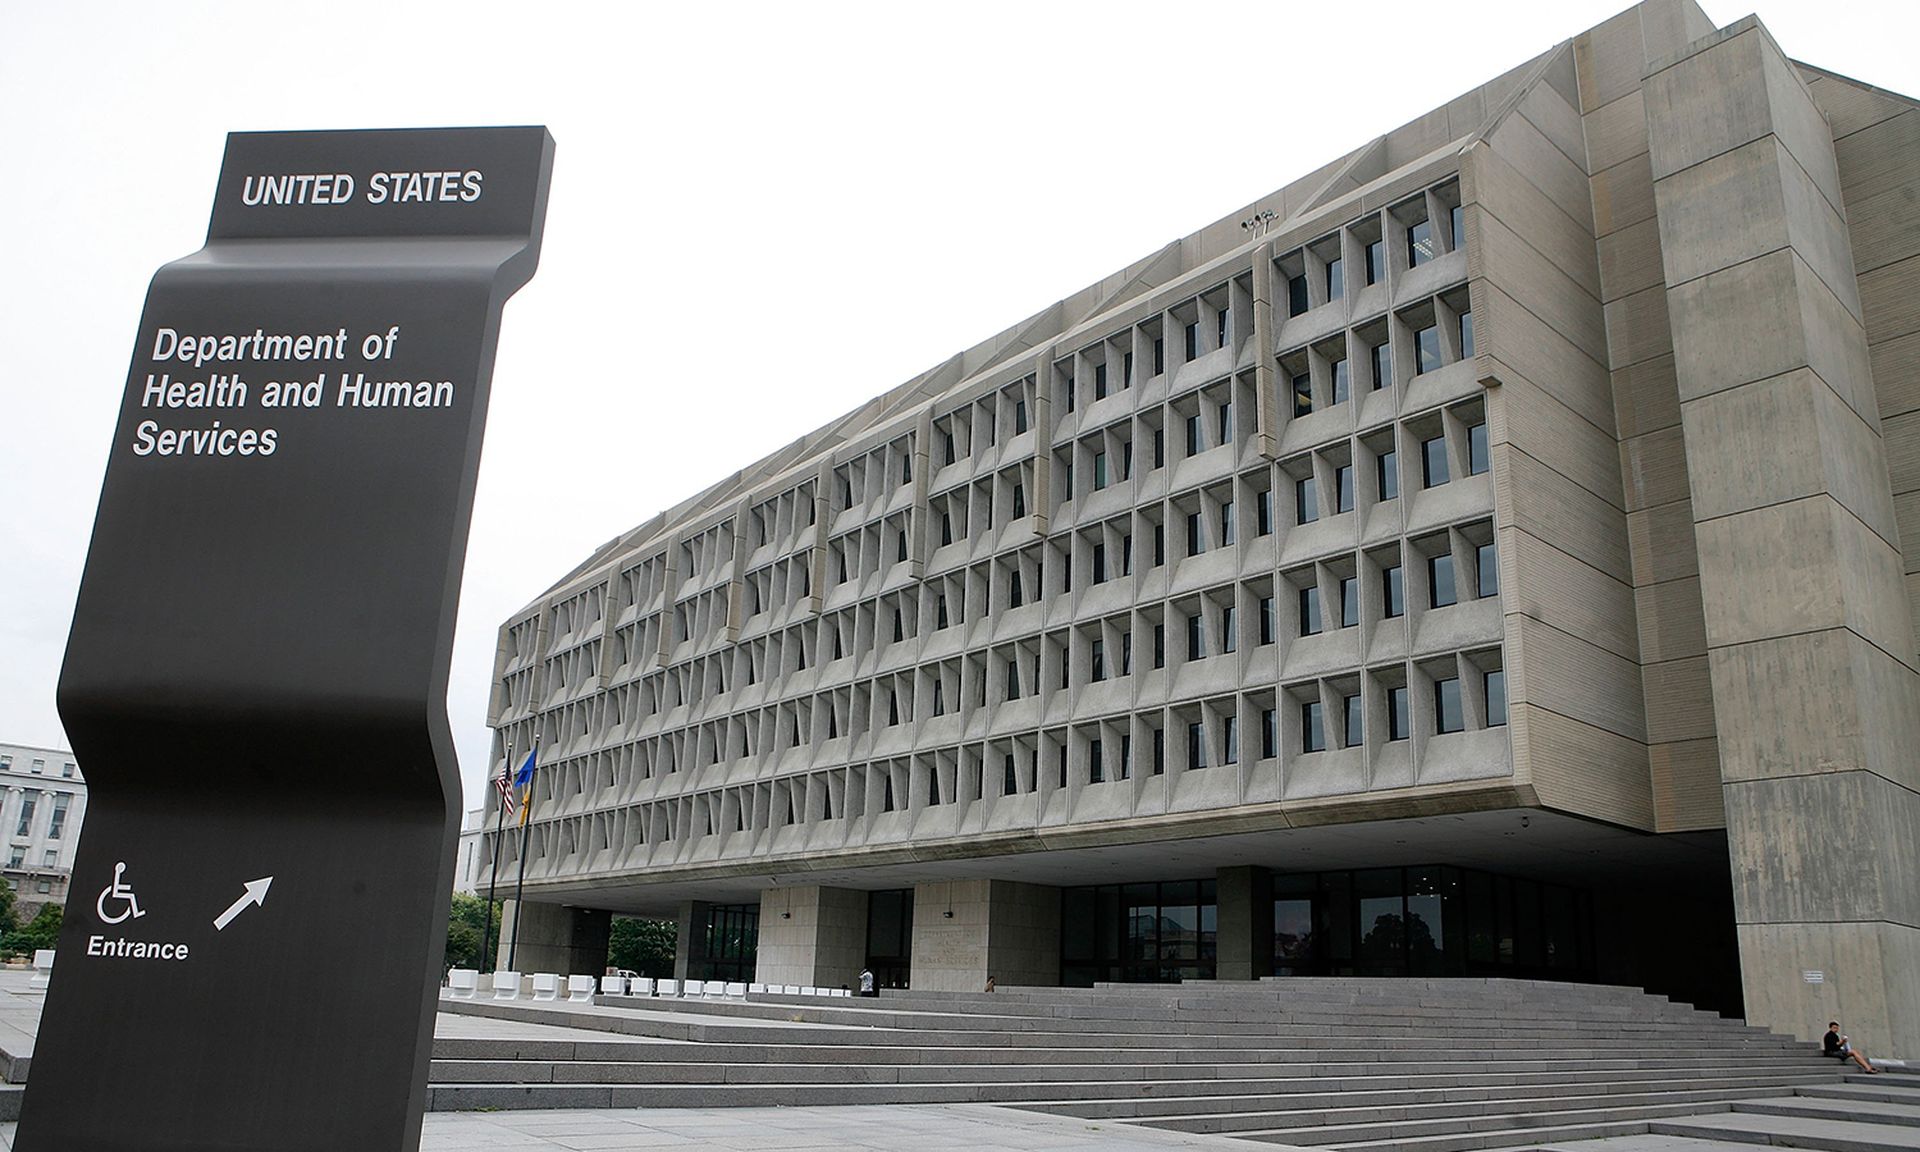 WASHINGTON &#8211; AUGUST 15:  The exterior of the U.S. Department of Health and Human Services is seen August 15, 2006 in Washington, DC.   (Photo by Alex Wong/Getty Images)